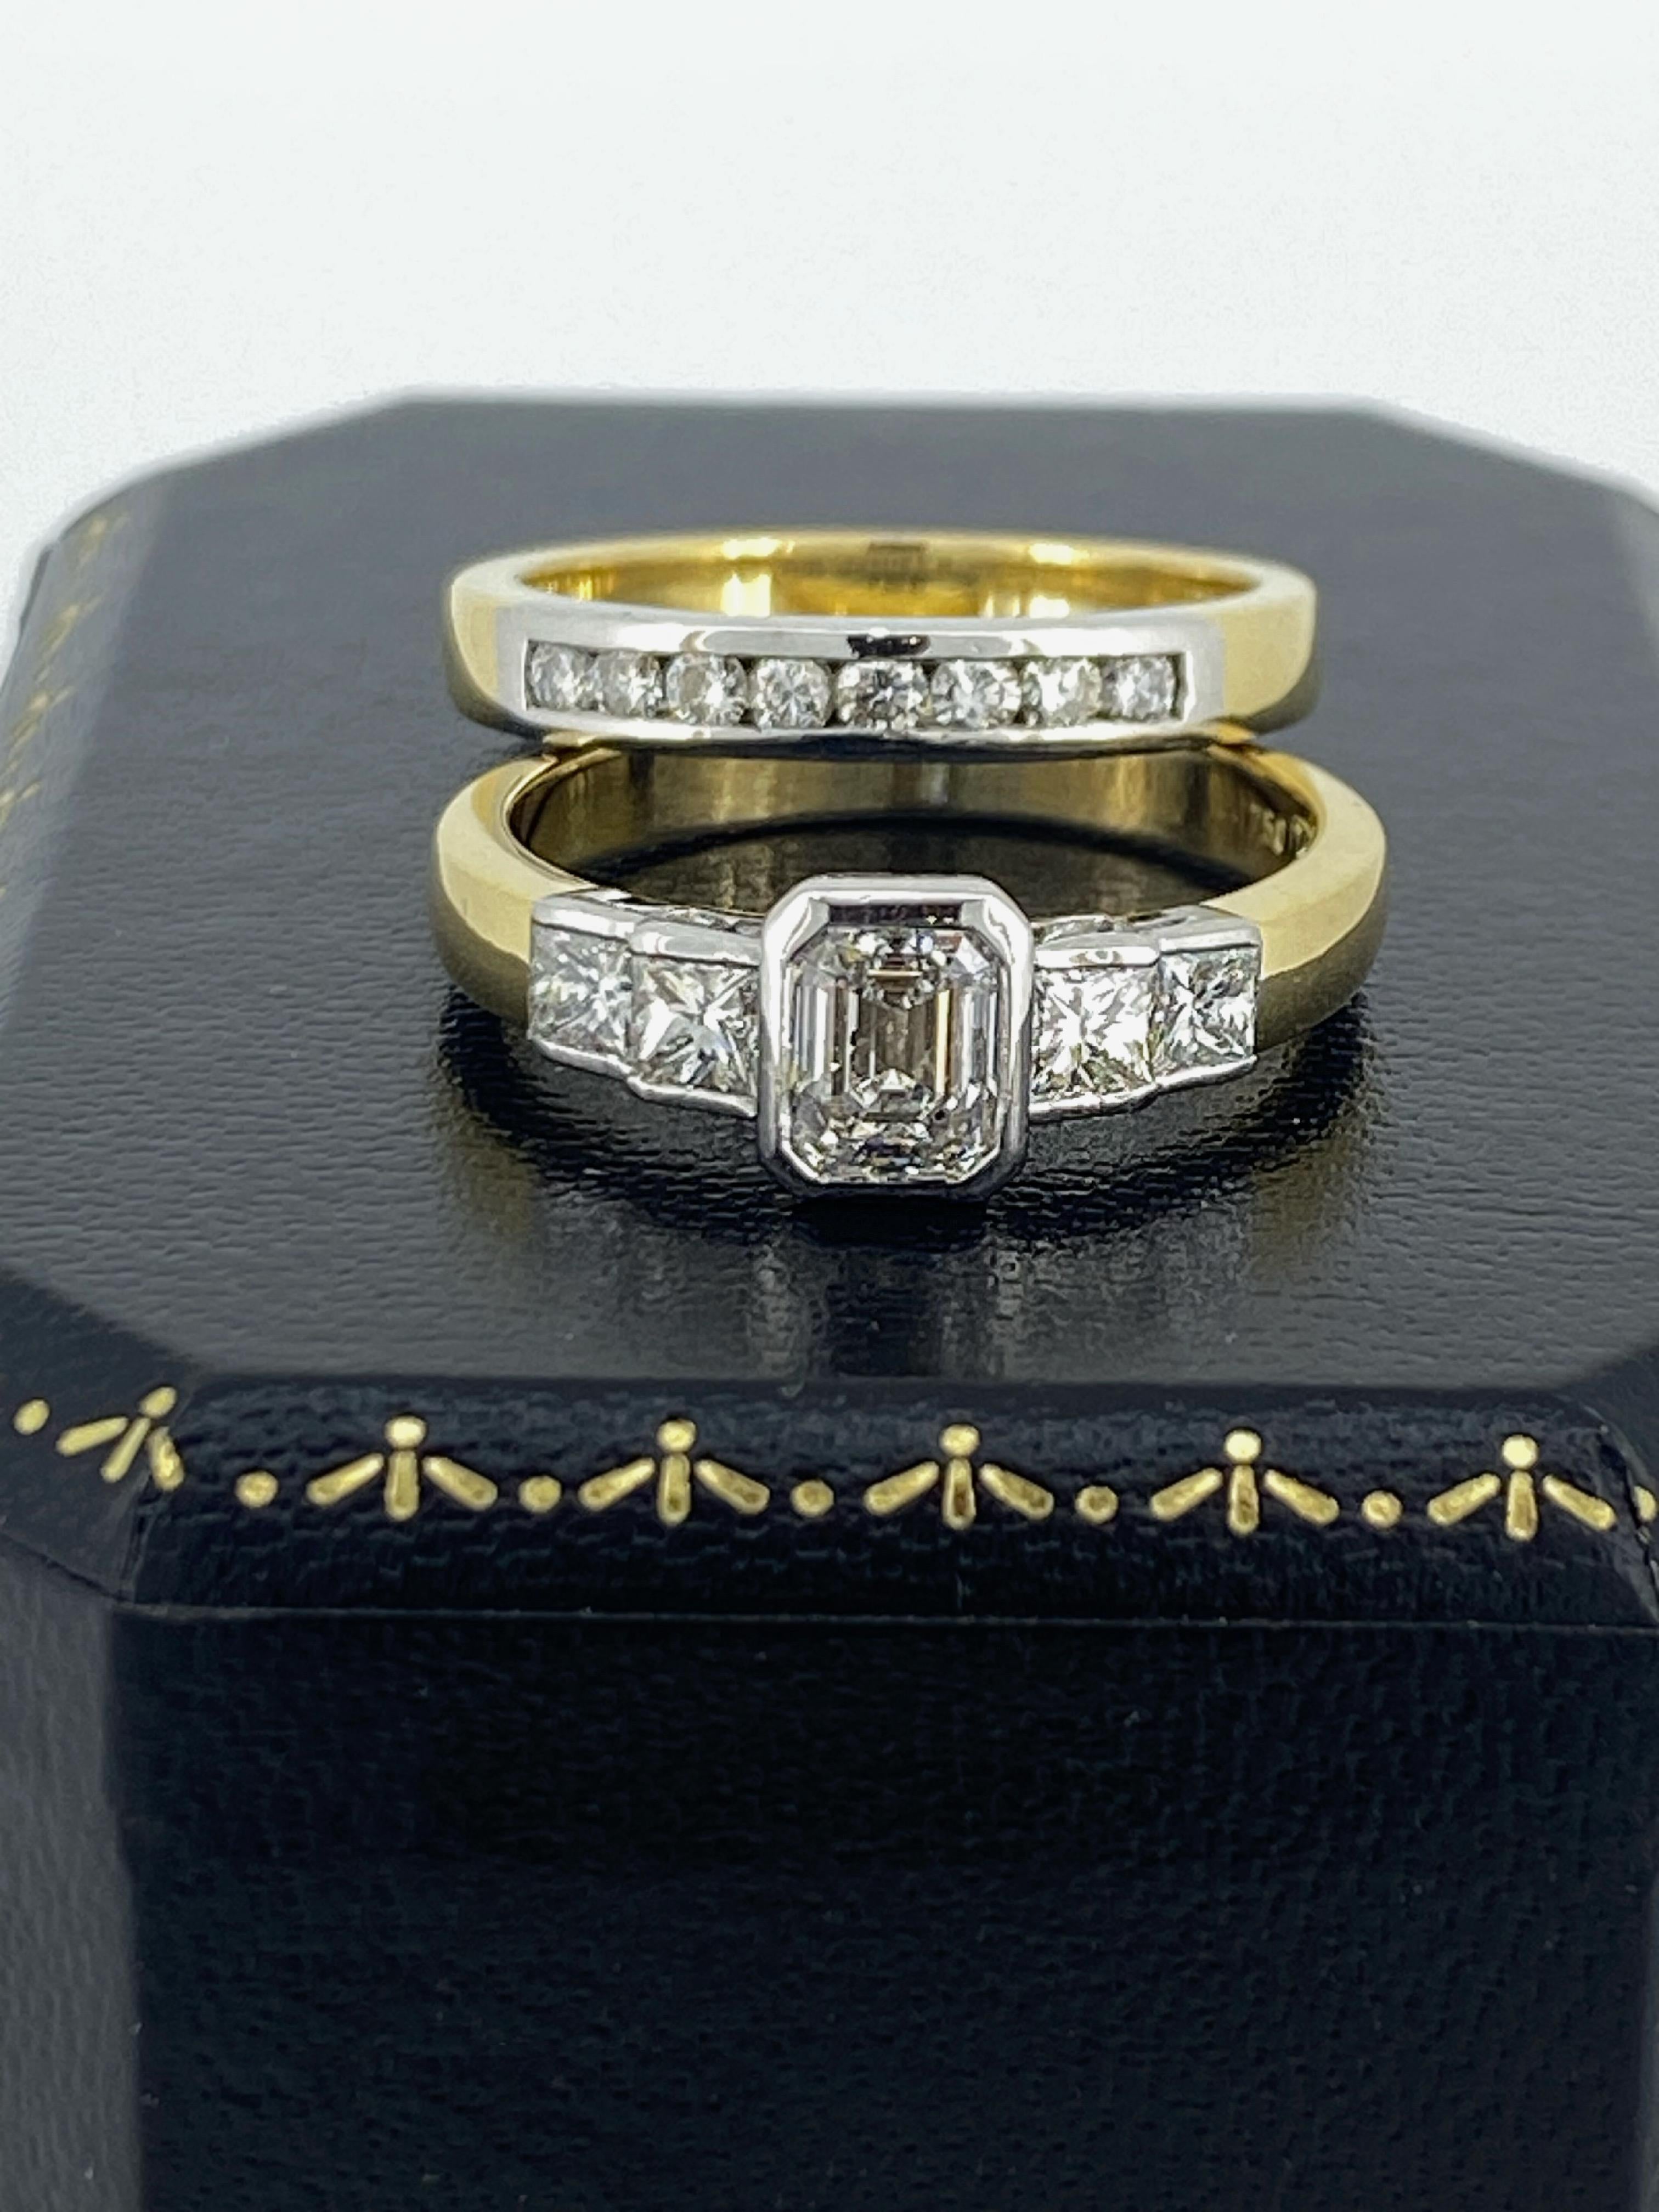 Make your special day even more unforgettable 
with this stunning handmade 18K White & Yellow Gold Wedding Set...

Comprising of: 

1. A gorgeous Engagement Ring,
centrally set with bezel set Diamond 
of desirable emerald cut, 
of impressive size of